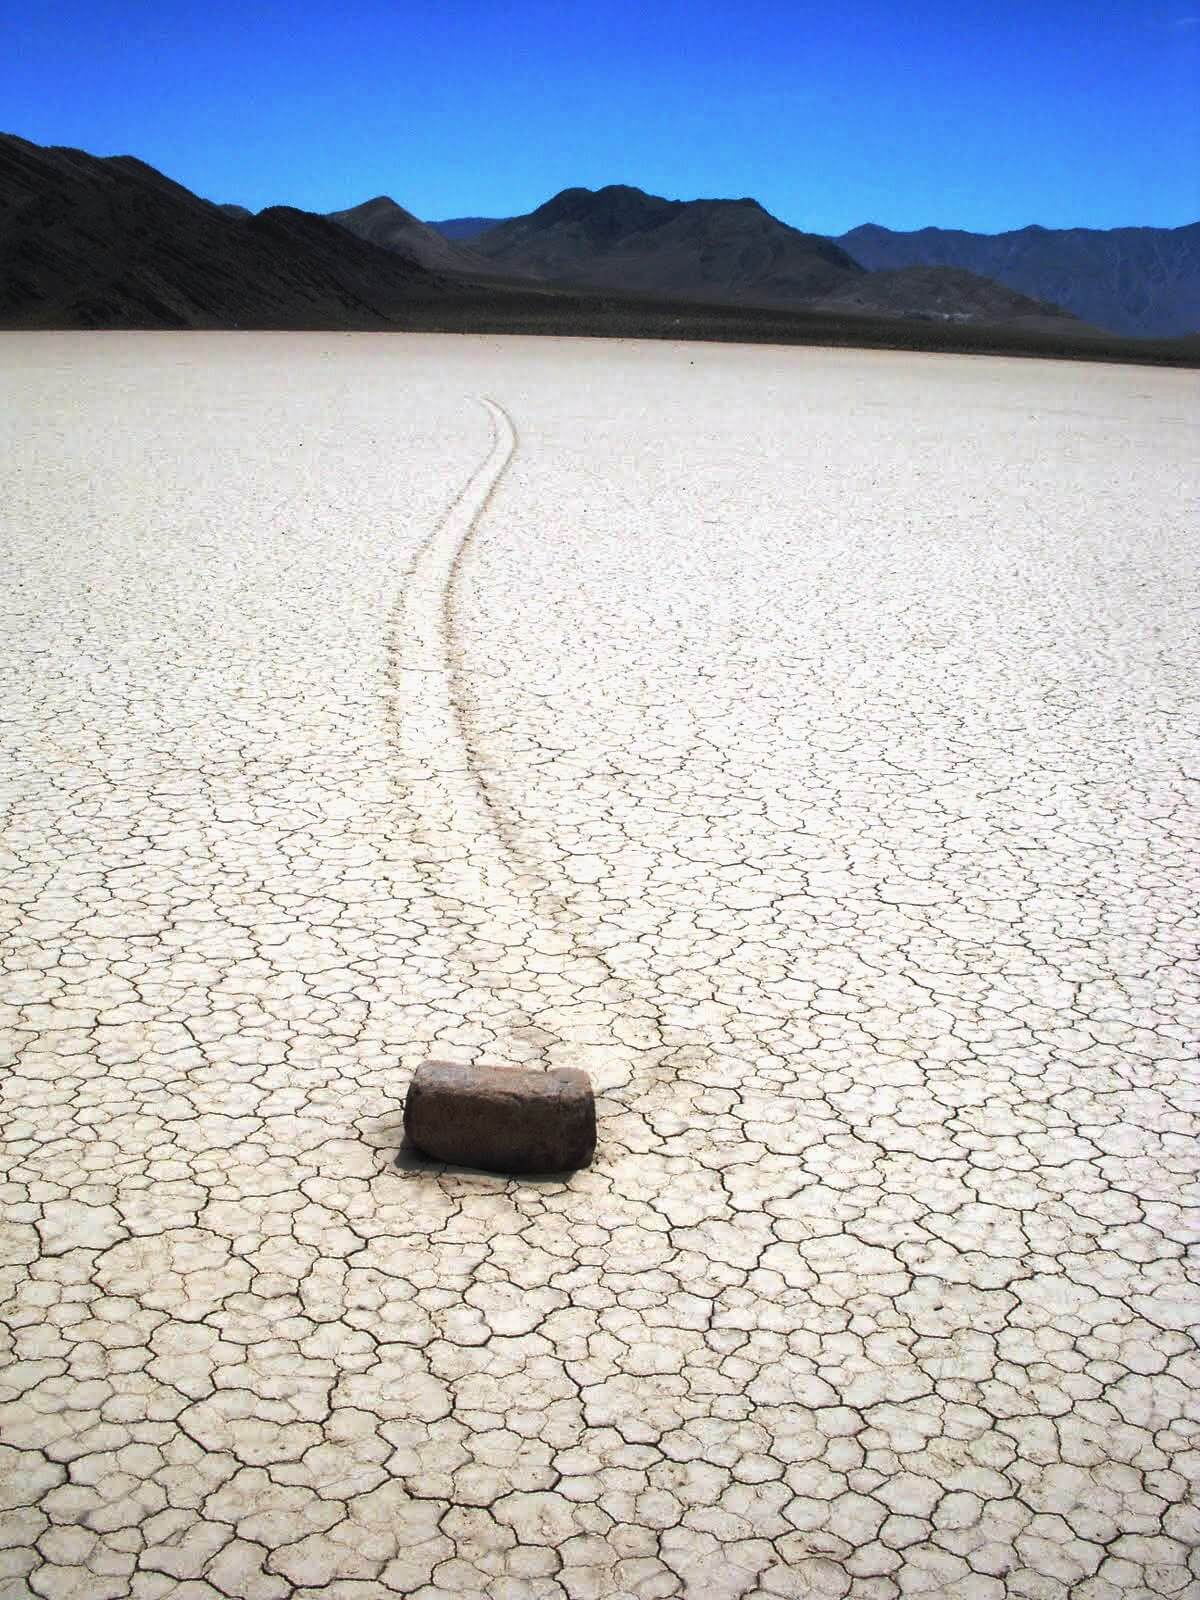 2 days in Death Valley, Racetrack Playa, Sailing Stones, Moving Stones